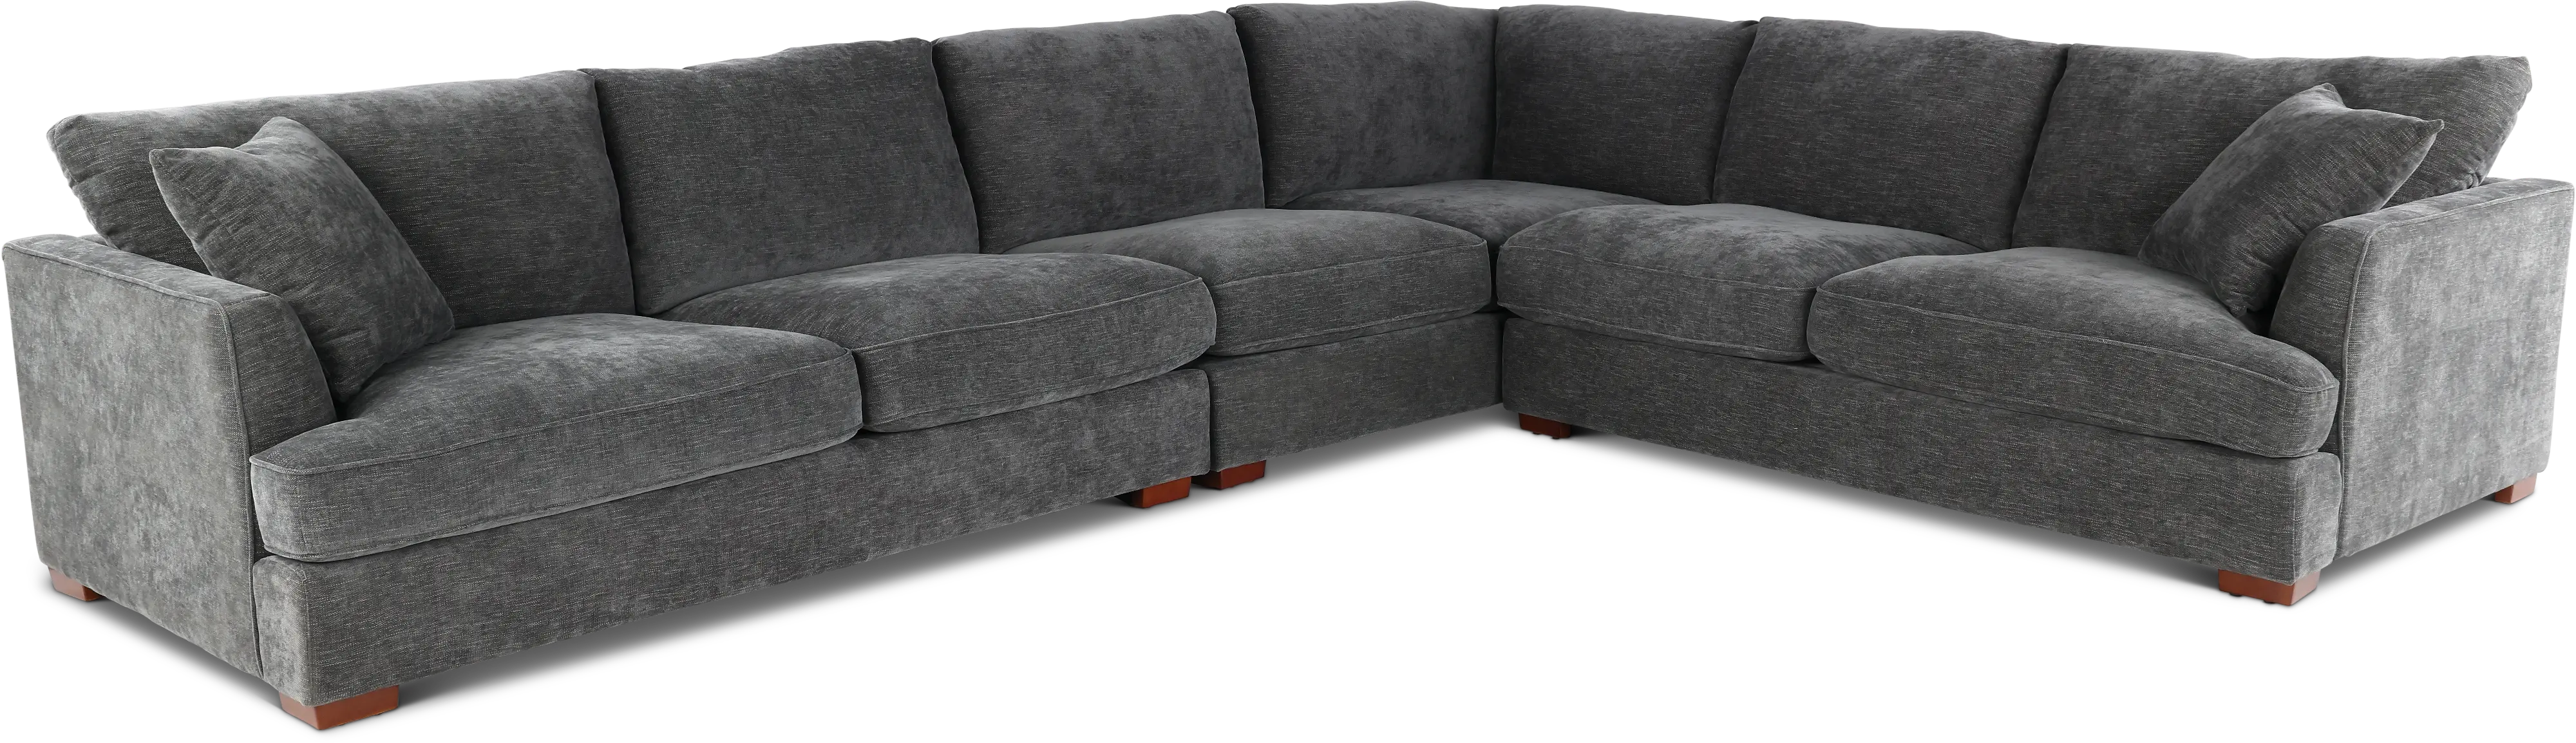 Creed Gray 3 Piece Sectional